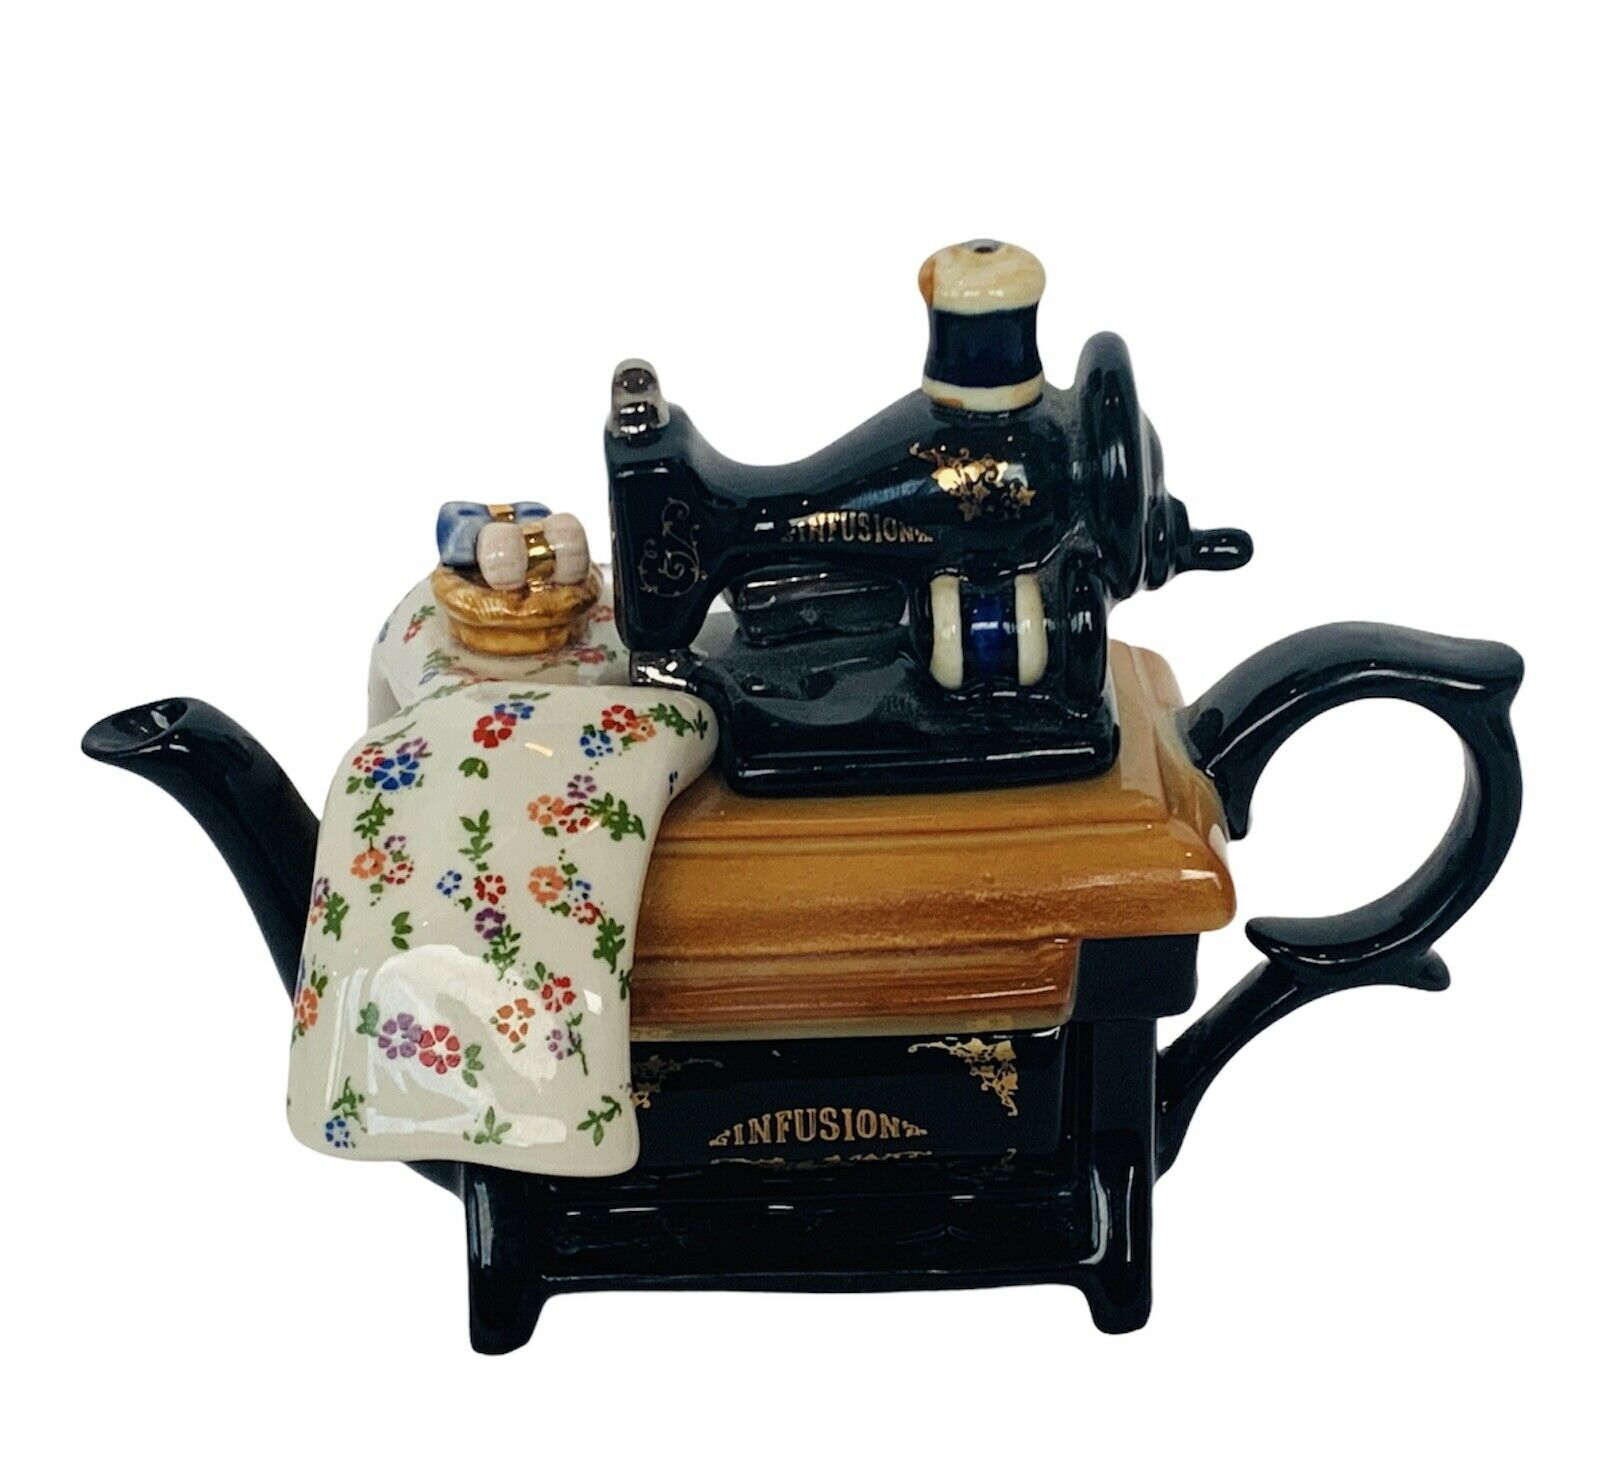 Cardew Designs England Sewing Machine Creamer Teapot Infusion Signed Figurine Uk